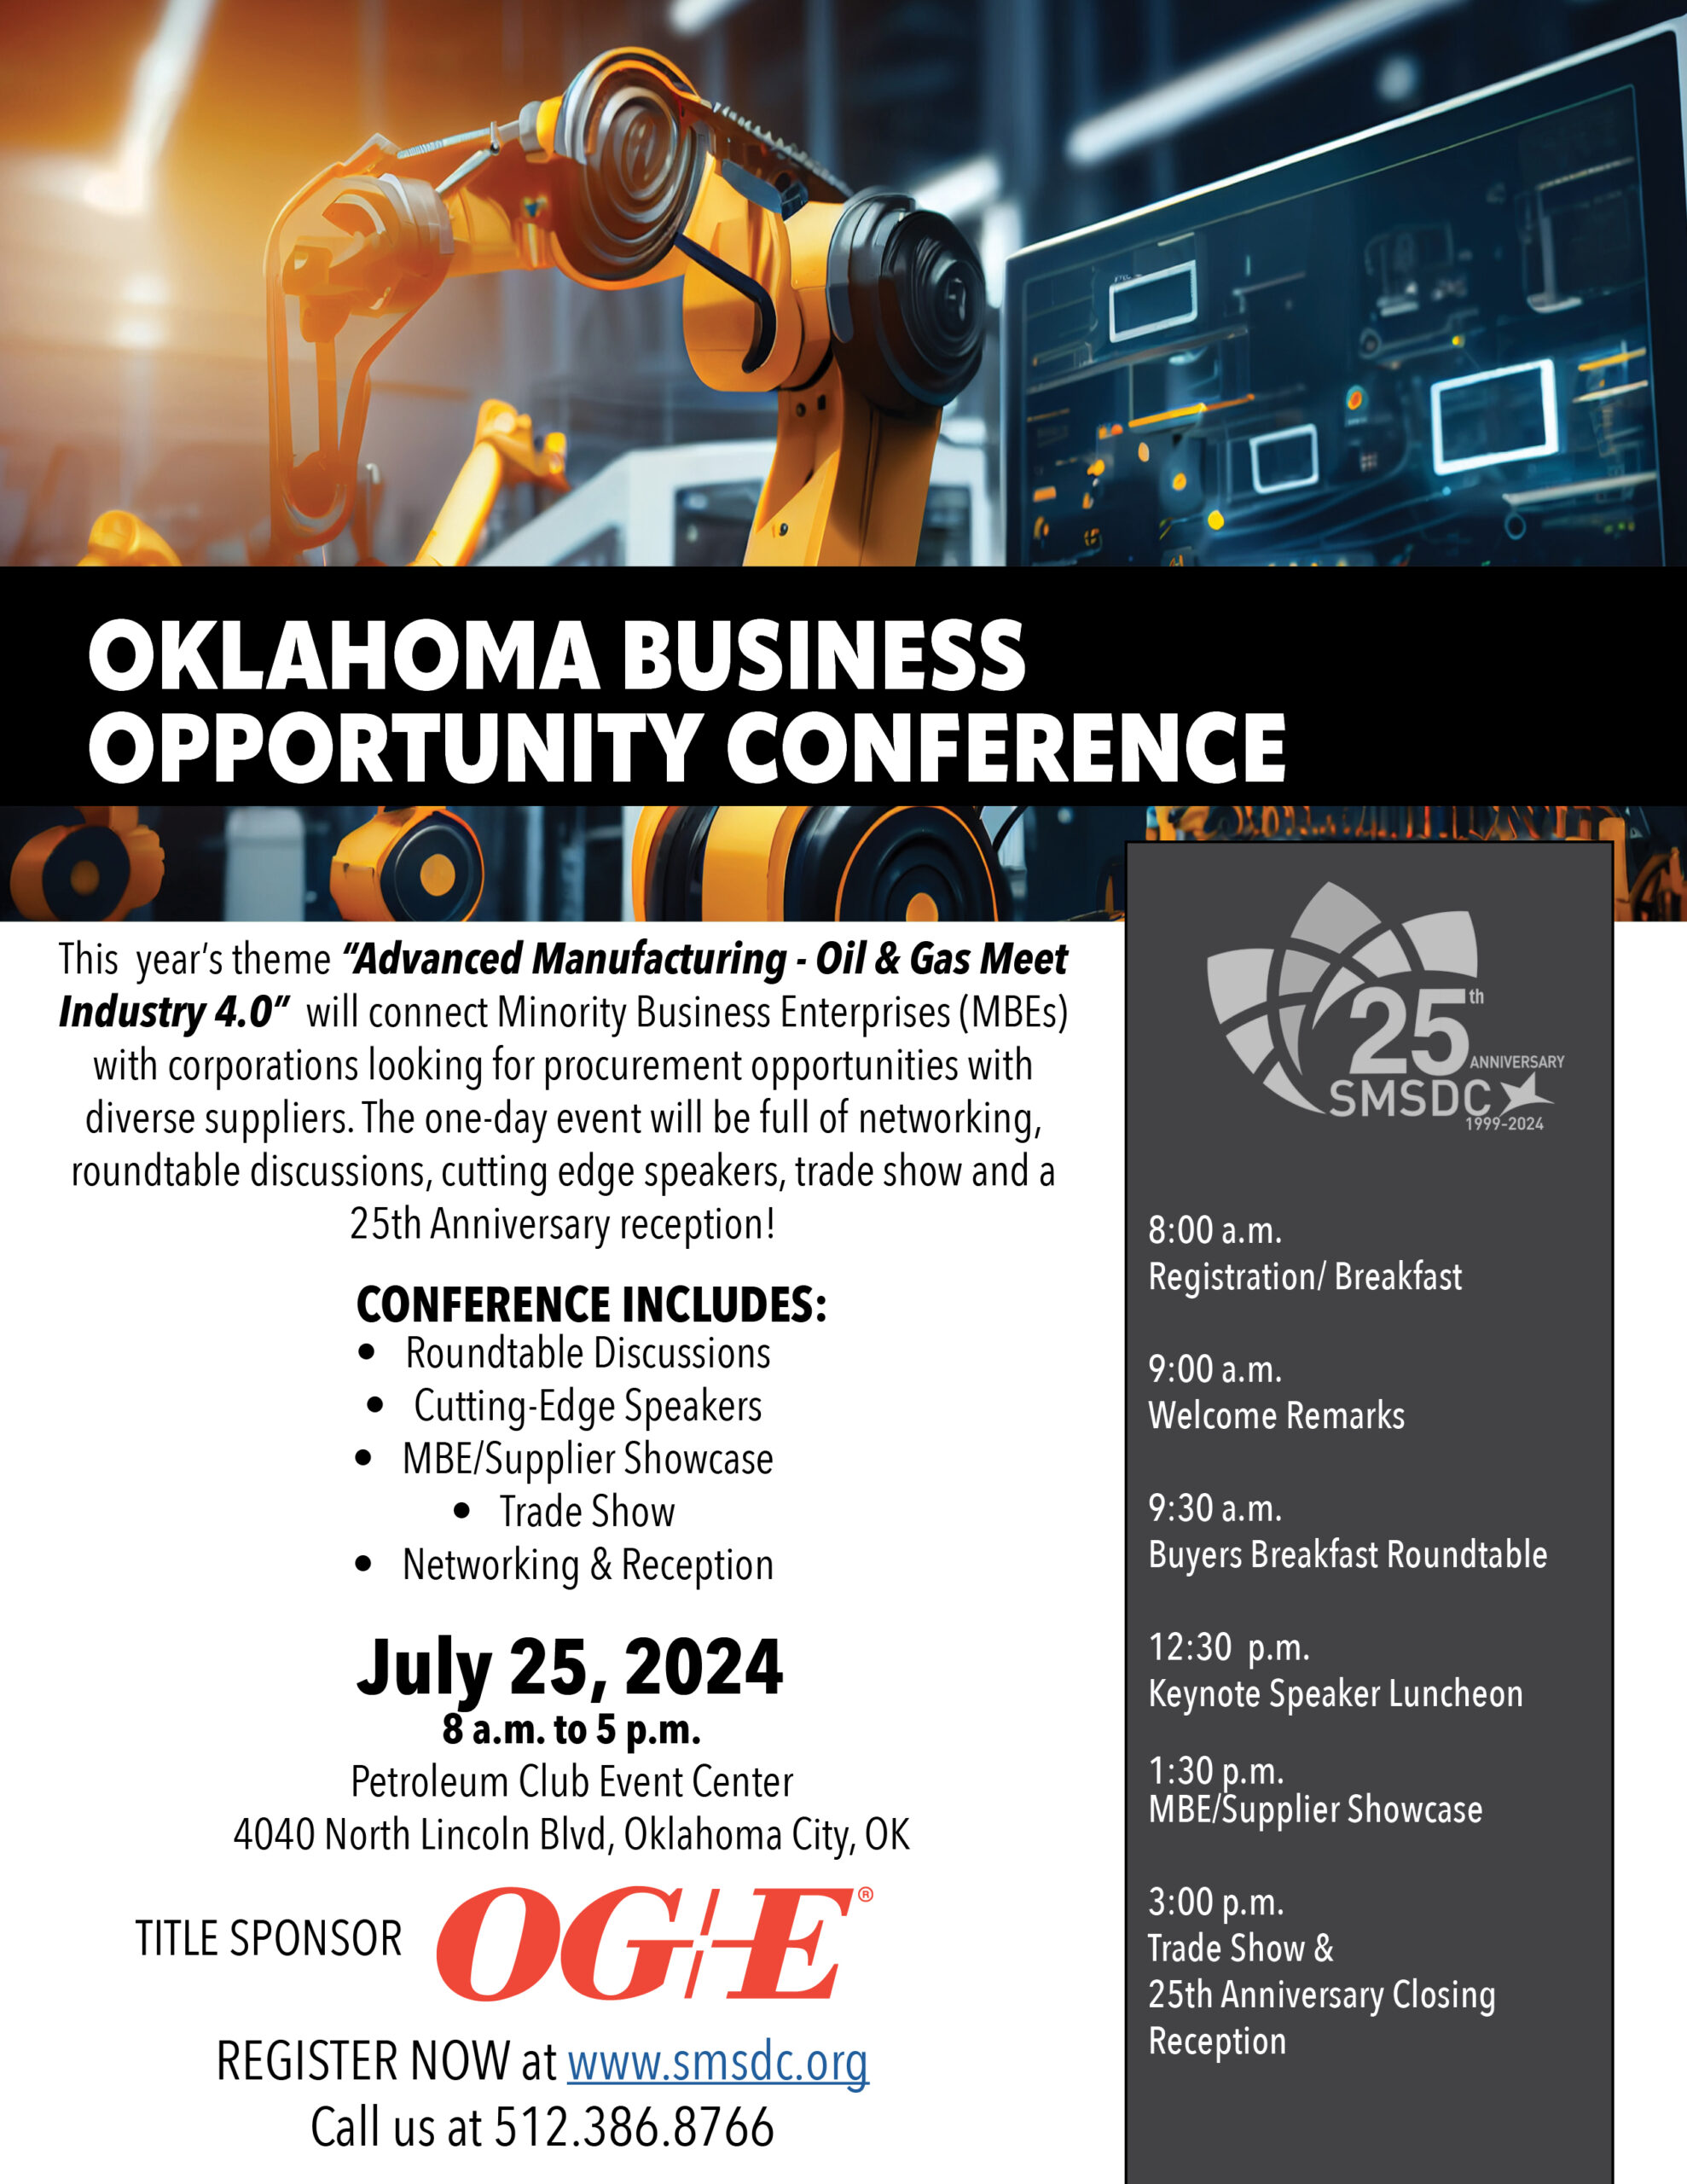 Oklahoma Business Opportunity Conference @ Petroleum Club Event Center